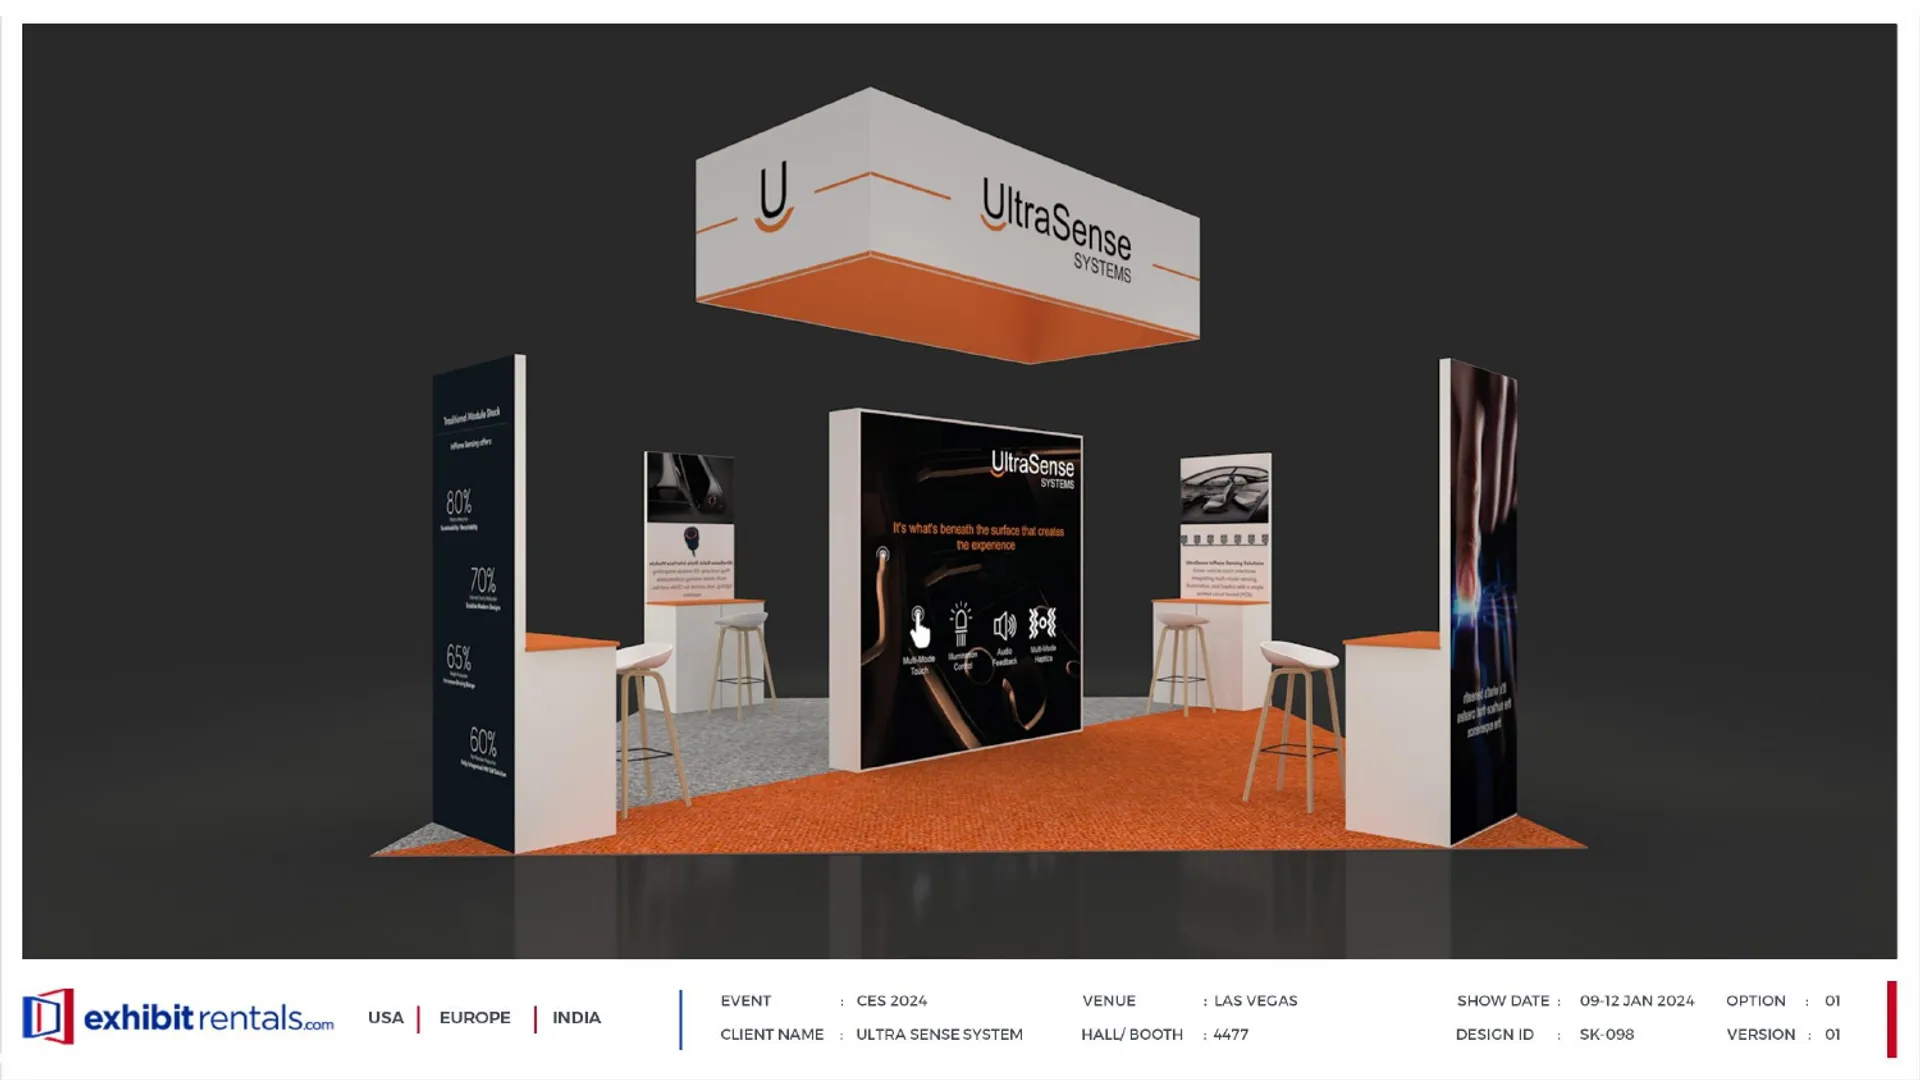 booth-design-projects/Exhibit-Rentals/2024-04-18-20x20-ISLAND-Project-108/1.1 - UltraSense System - ER Design Presentation.pptx-15_page-0001-9kcz2.jpg